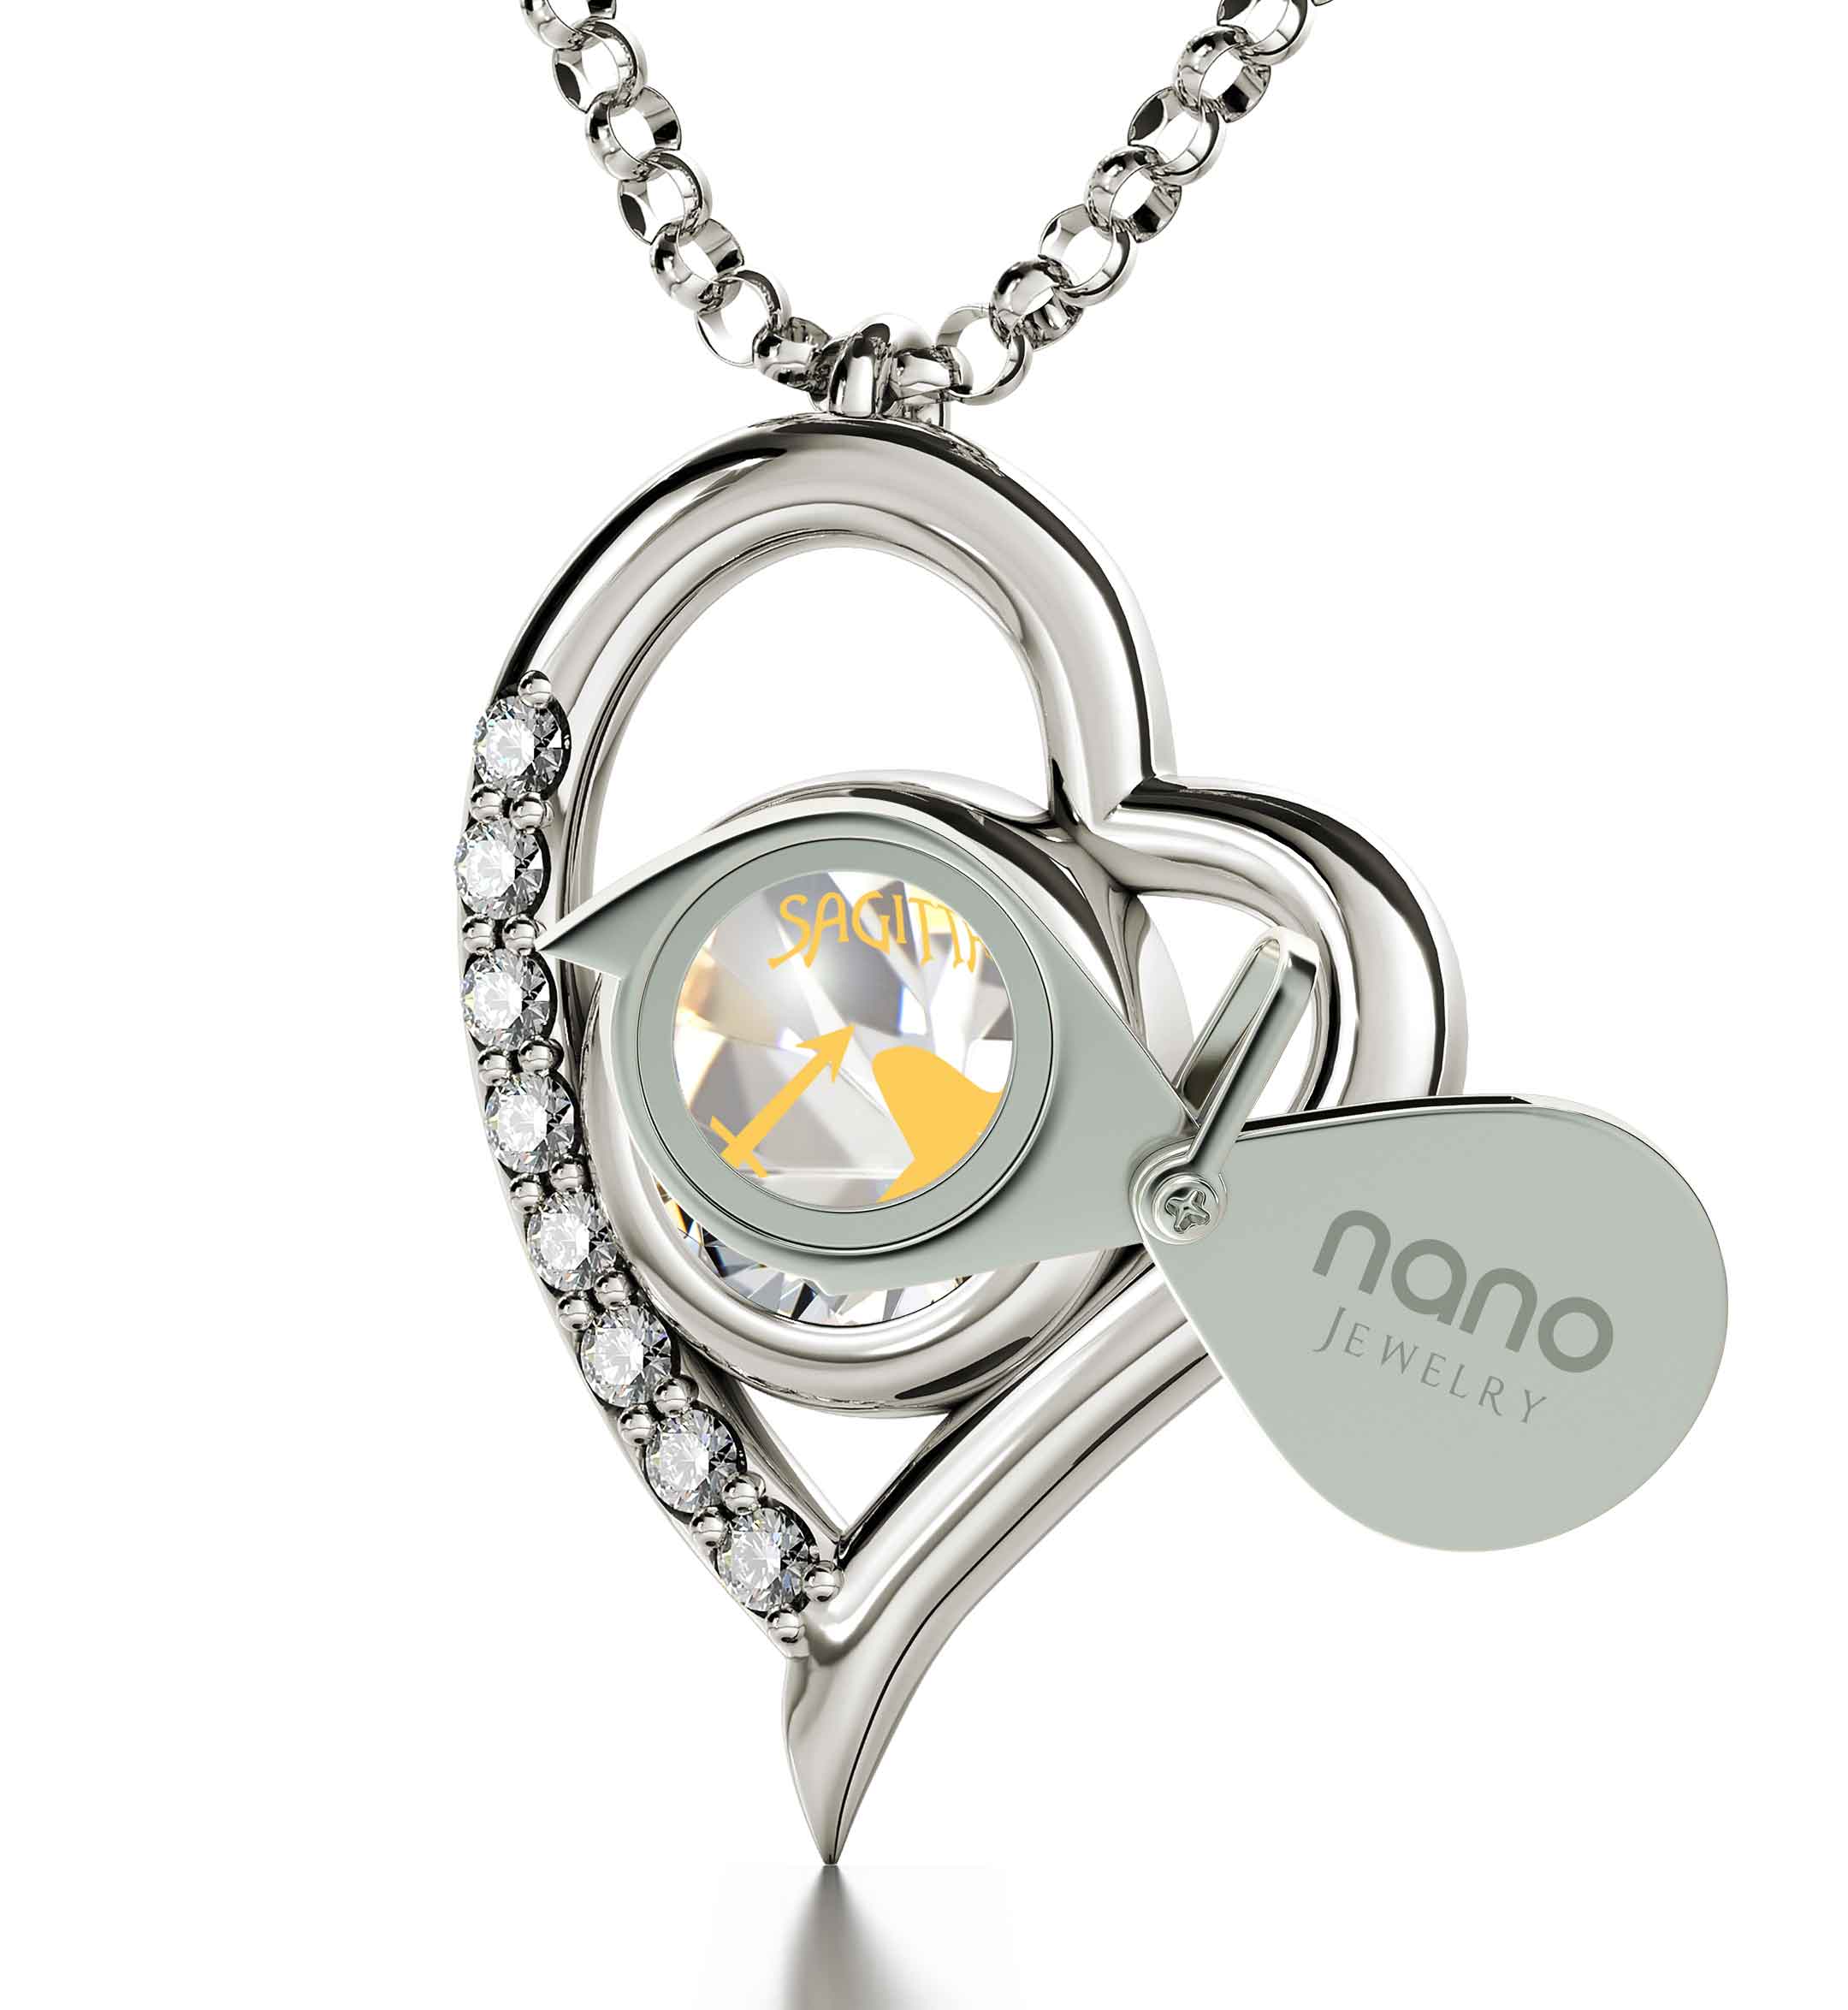 A 925 Sterling Silver Sagittarius Necklace Zodiac Heart Pendant with rhinestone embellishments, displayed against a white background.